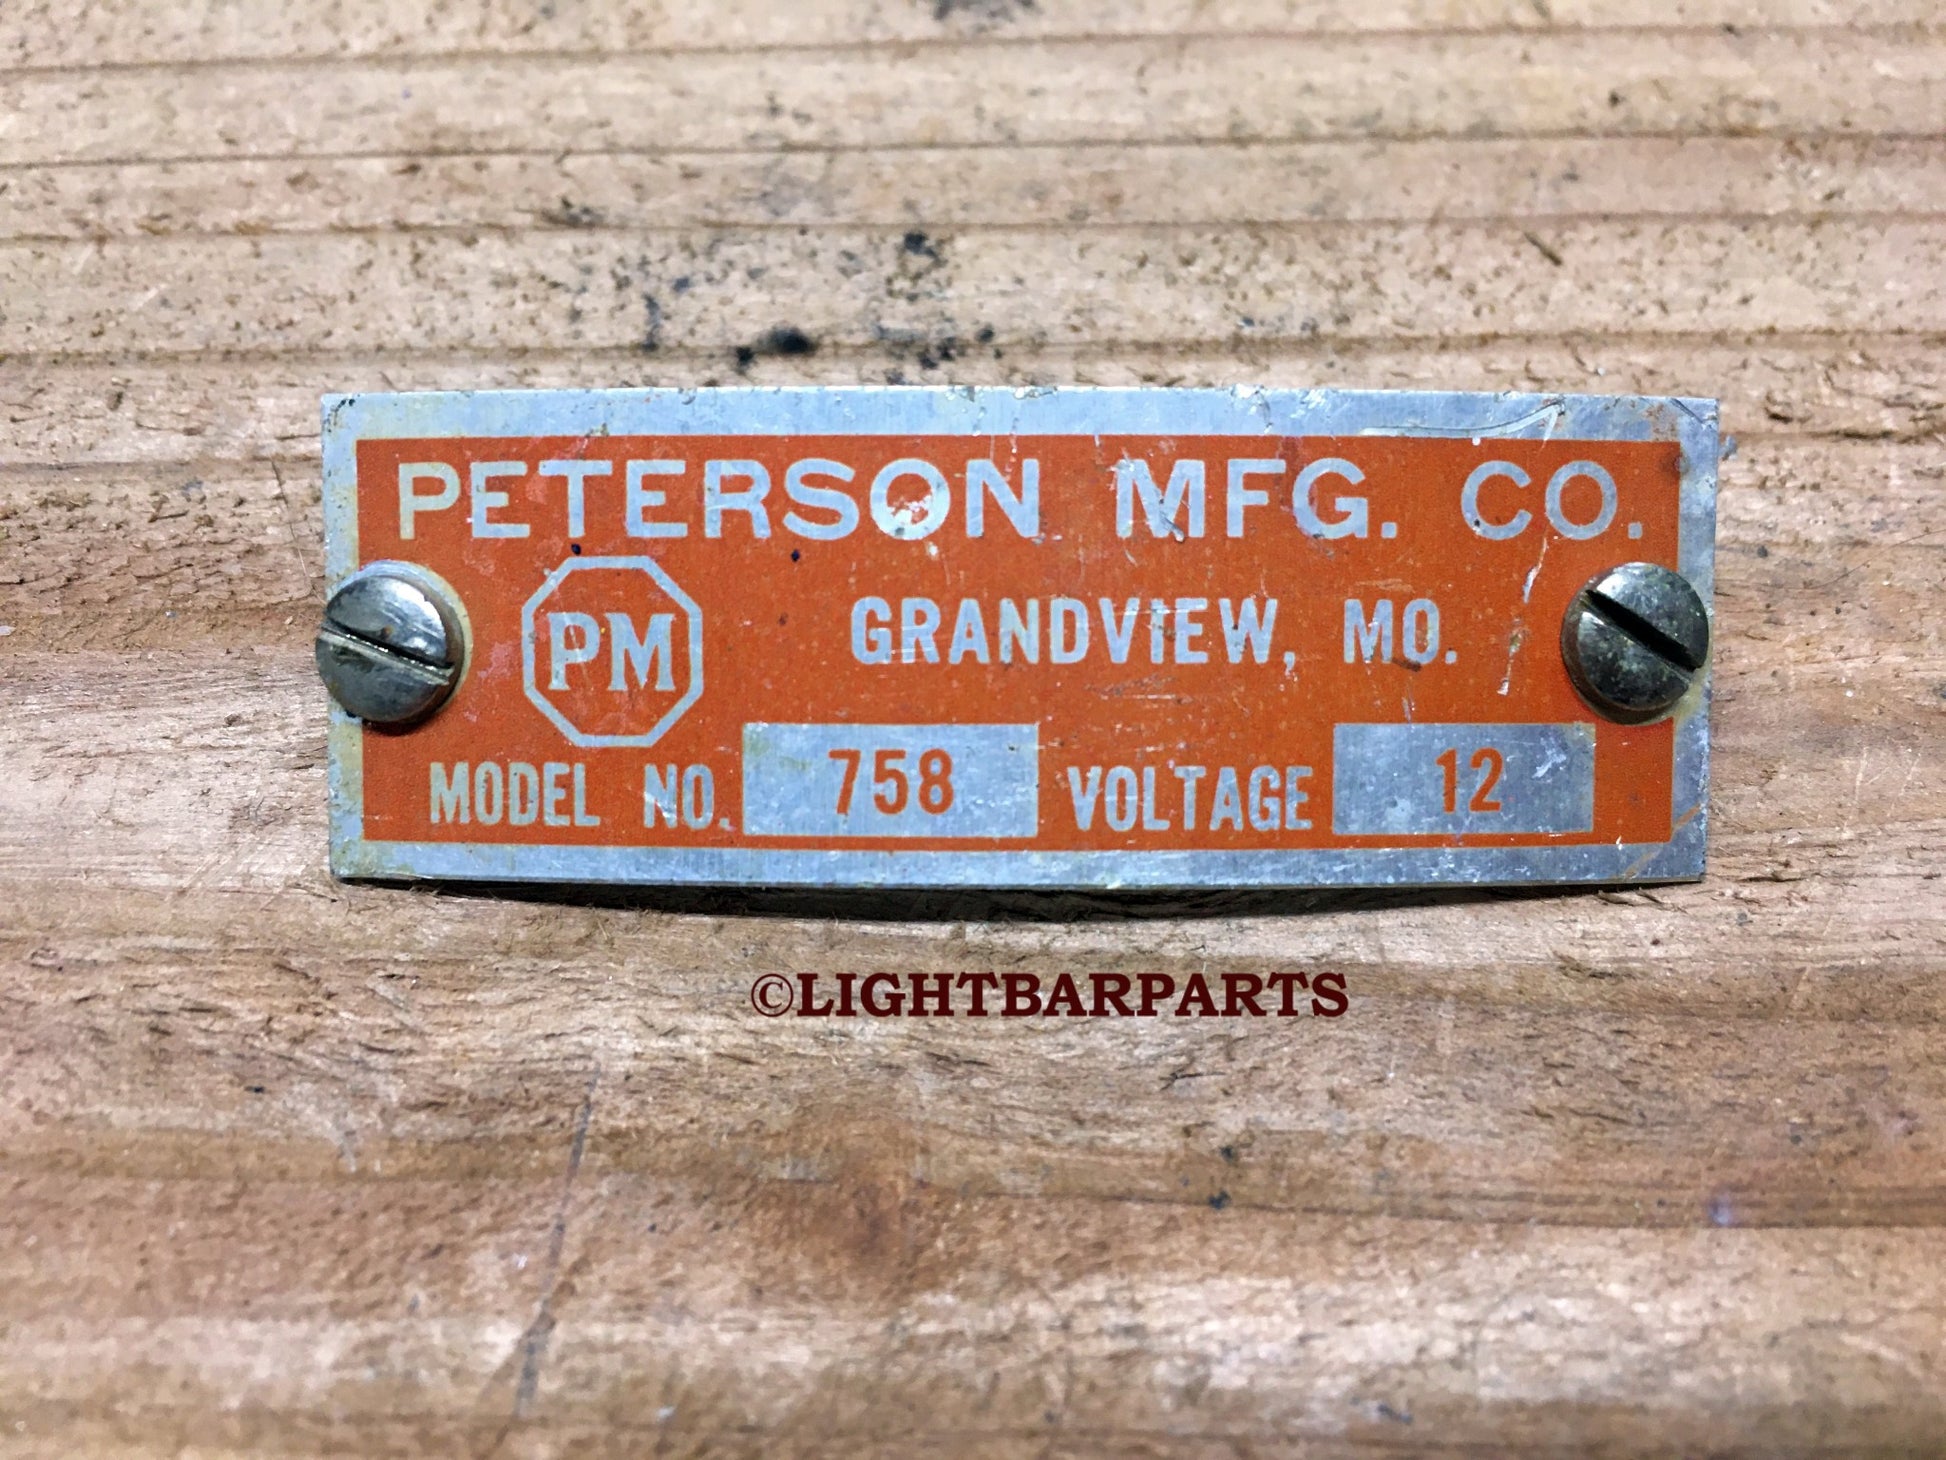 Peterson MFG Manufacturing Model Number 758 - ID Tag - Data Plate - With Screws - light bar parts